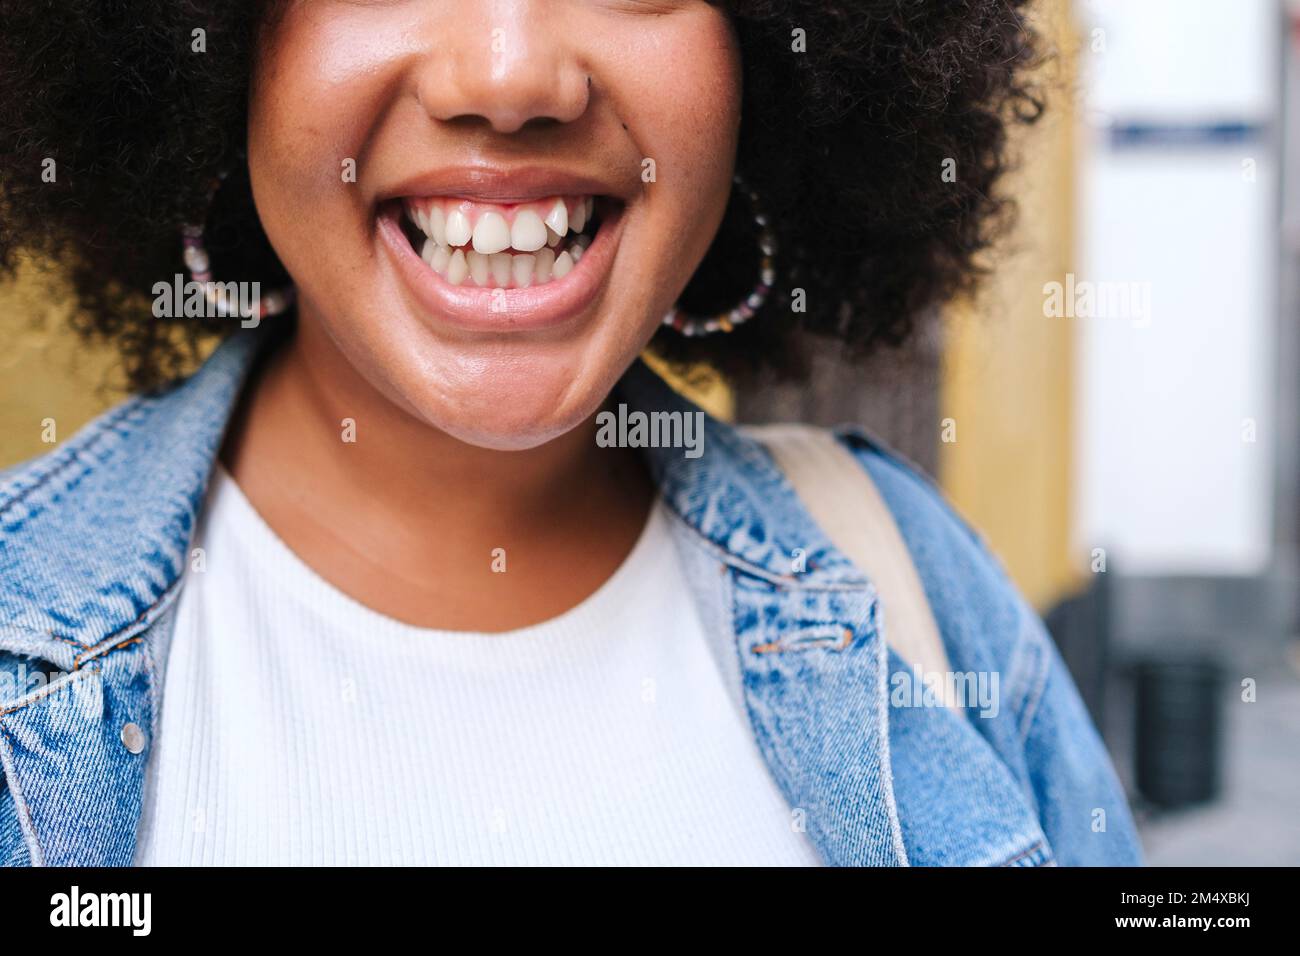 Cheerful young woman showing toothy smile Stock Photo